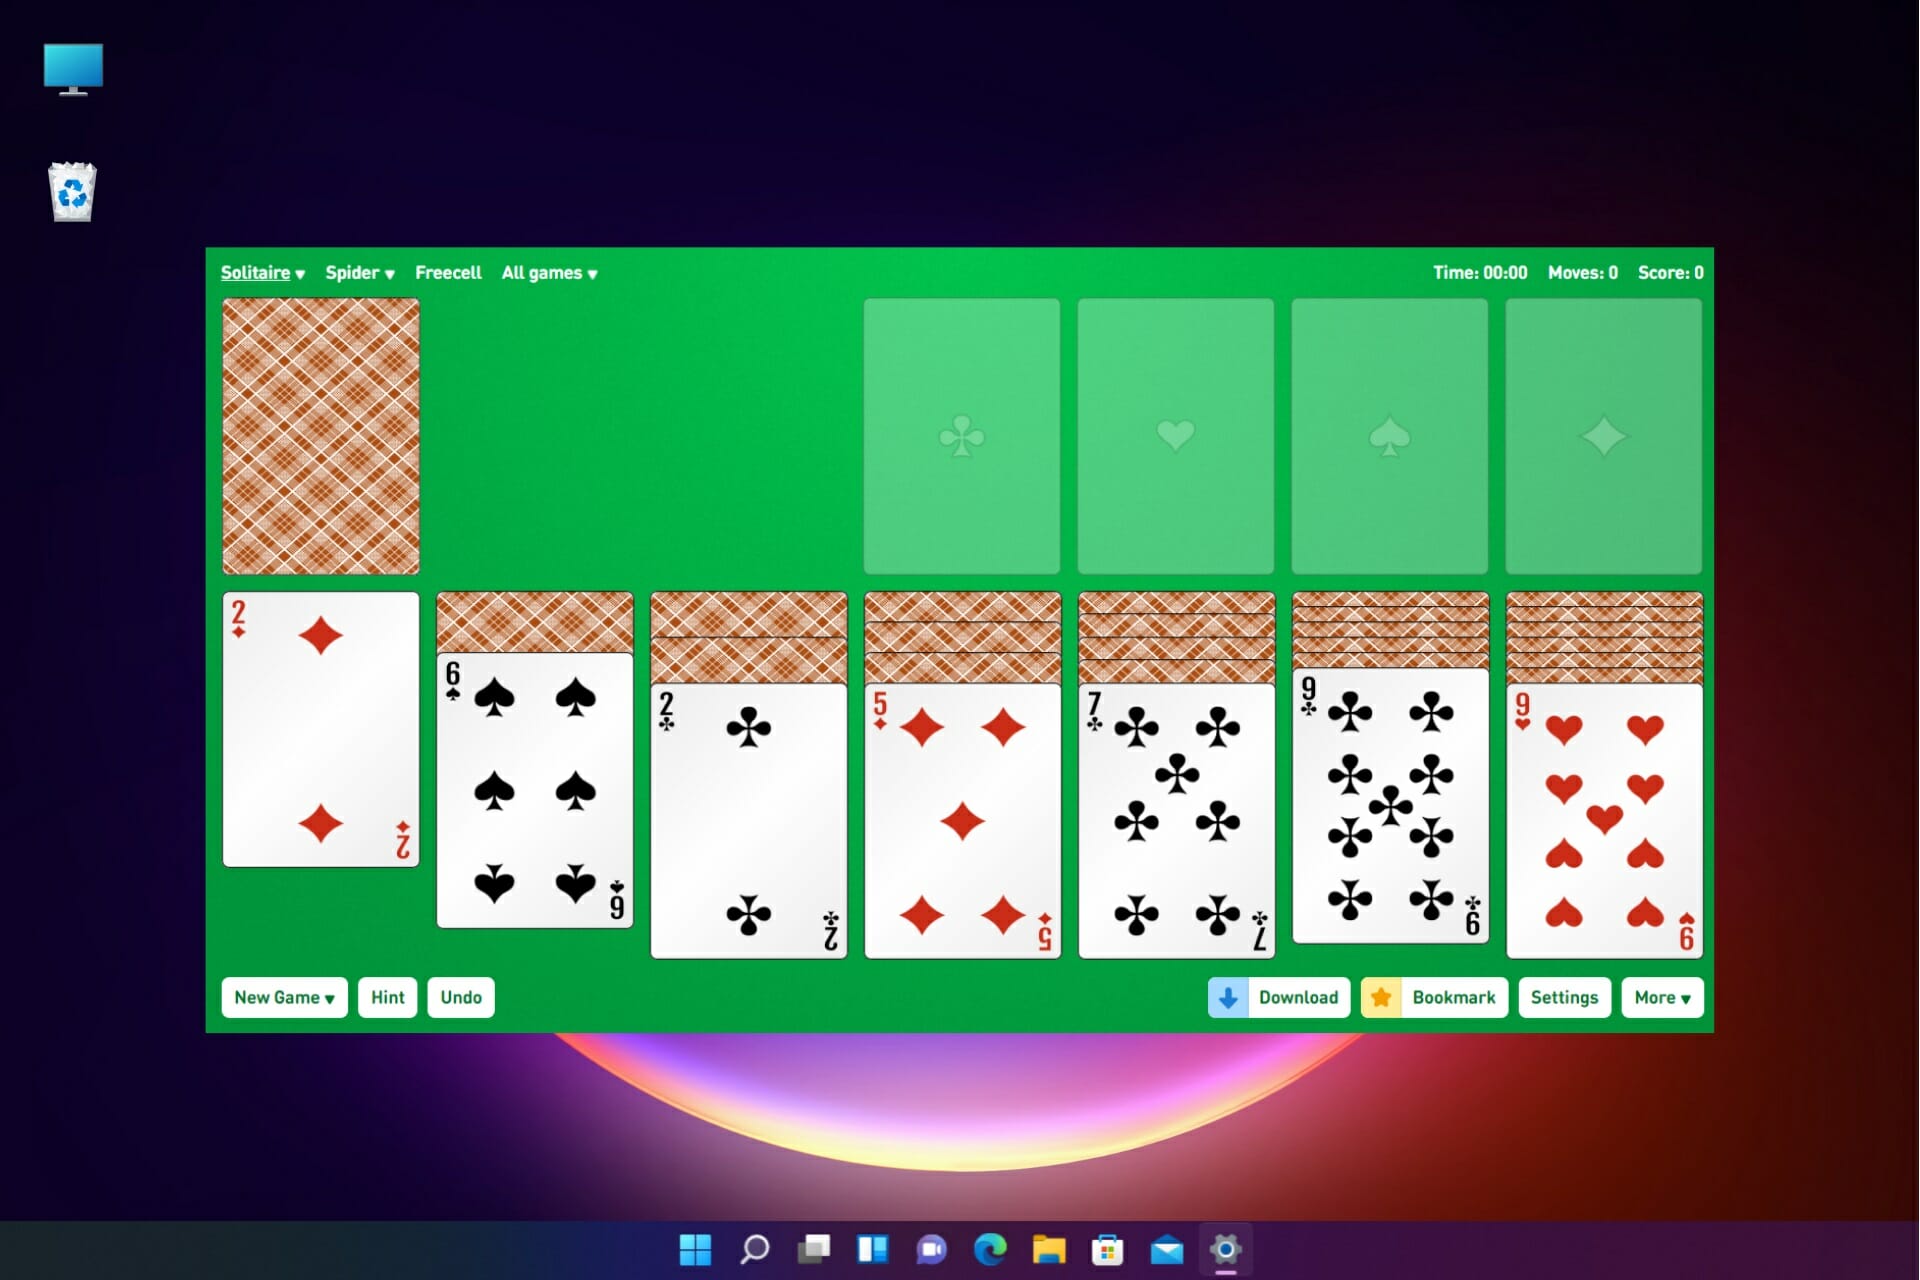 Play Free Solitaire Games Online [NO DOWNLOAD]